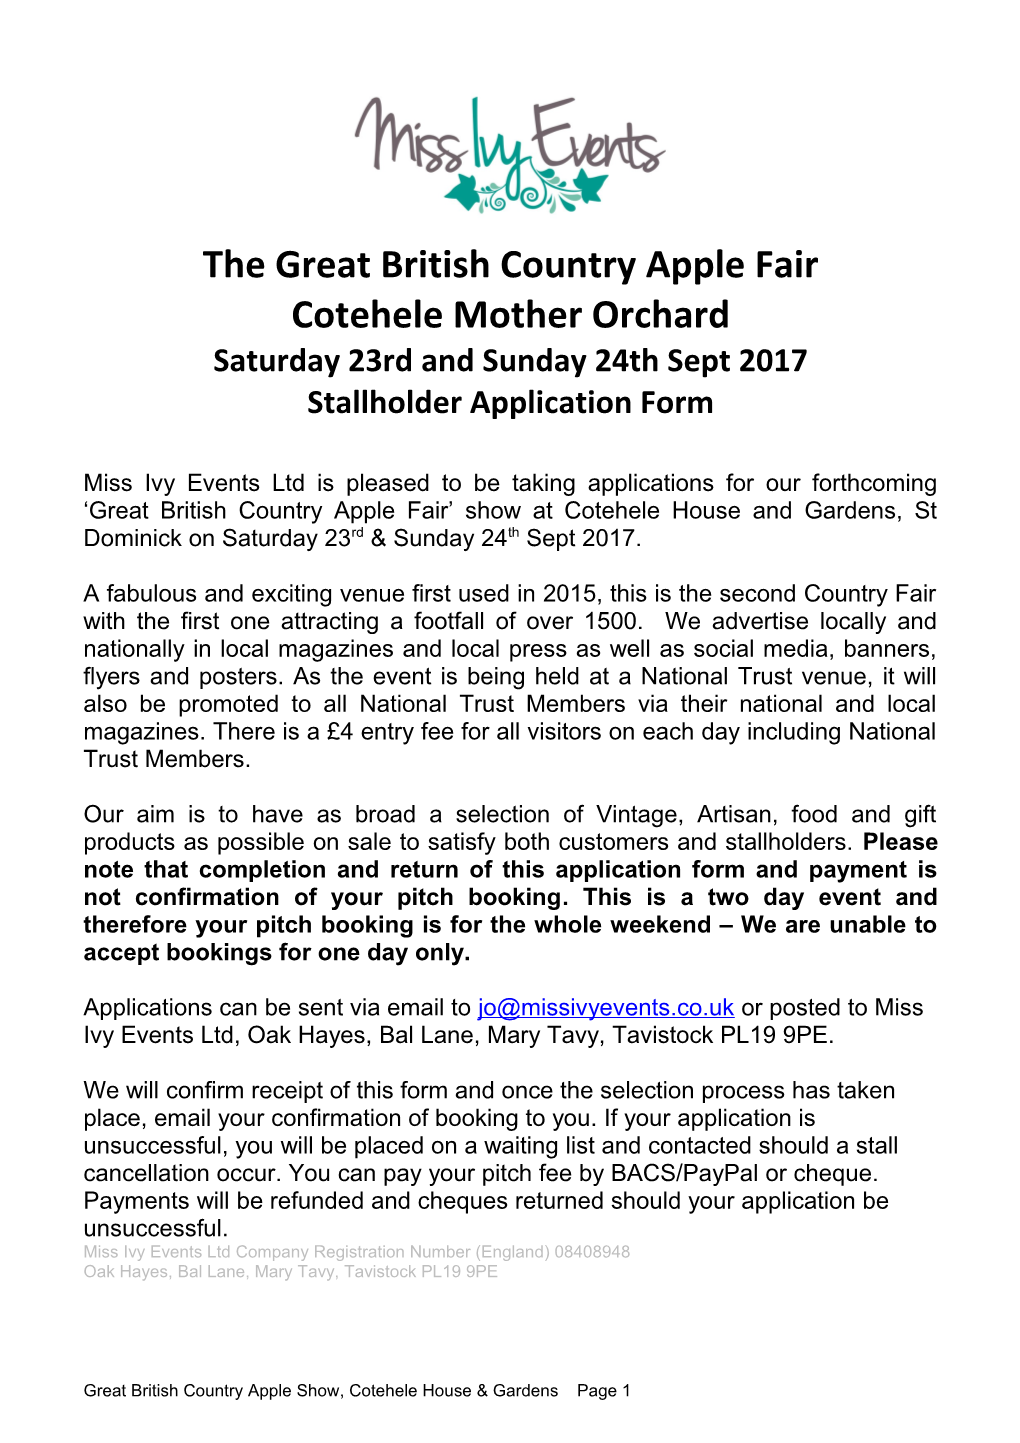 The Great British Country Apple Fair